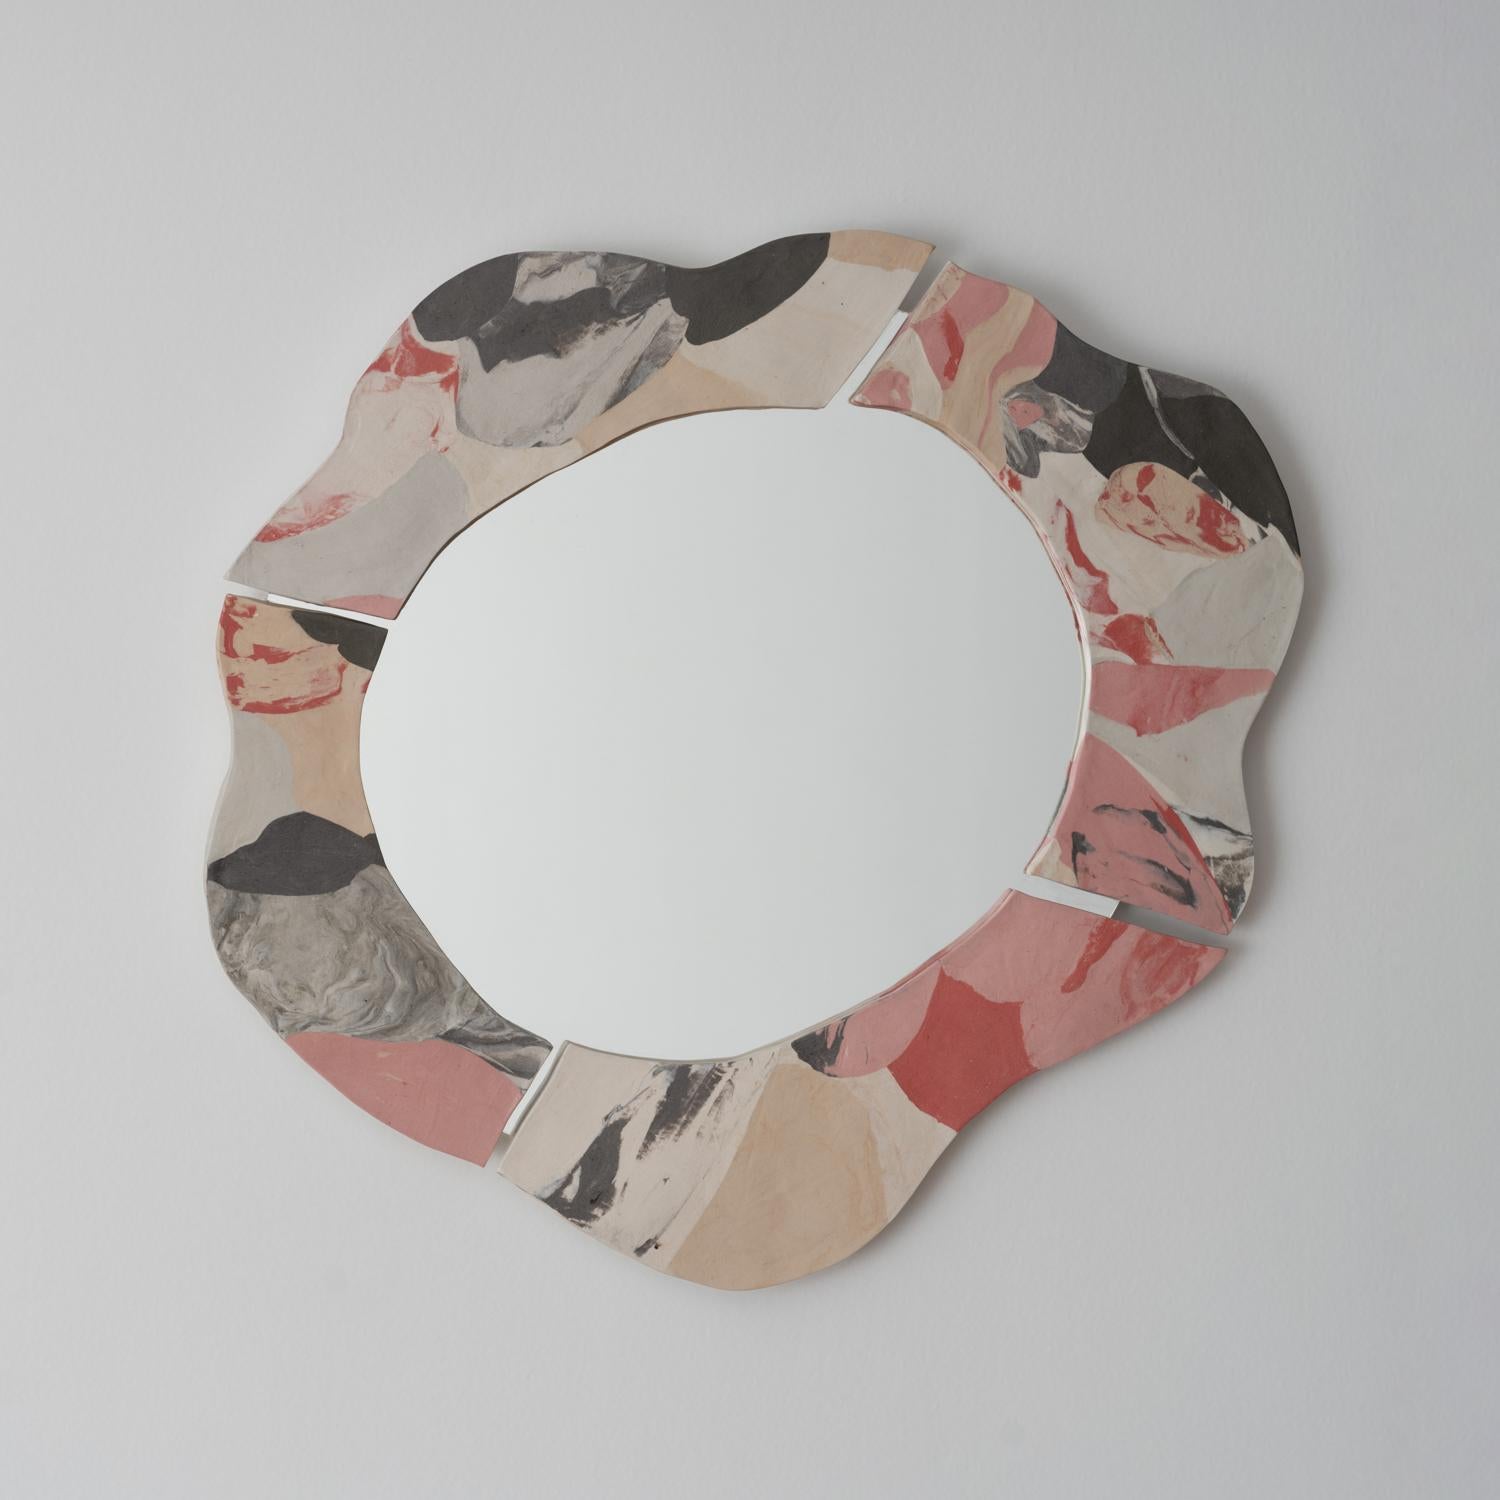 Hand-built Nerikomi Porcelain mirror in a delicate palette of pale pink, warm peach, charcoal grey, and dove white. A beautiful piece for anywhere in the house, including the living room, a powder room, or even a child's bedroom.

Additional